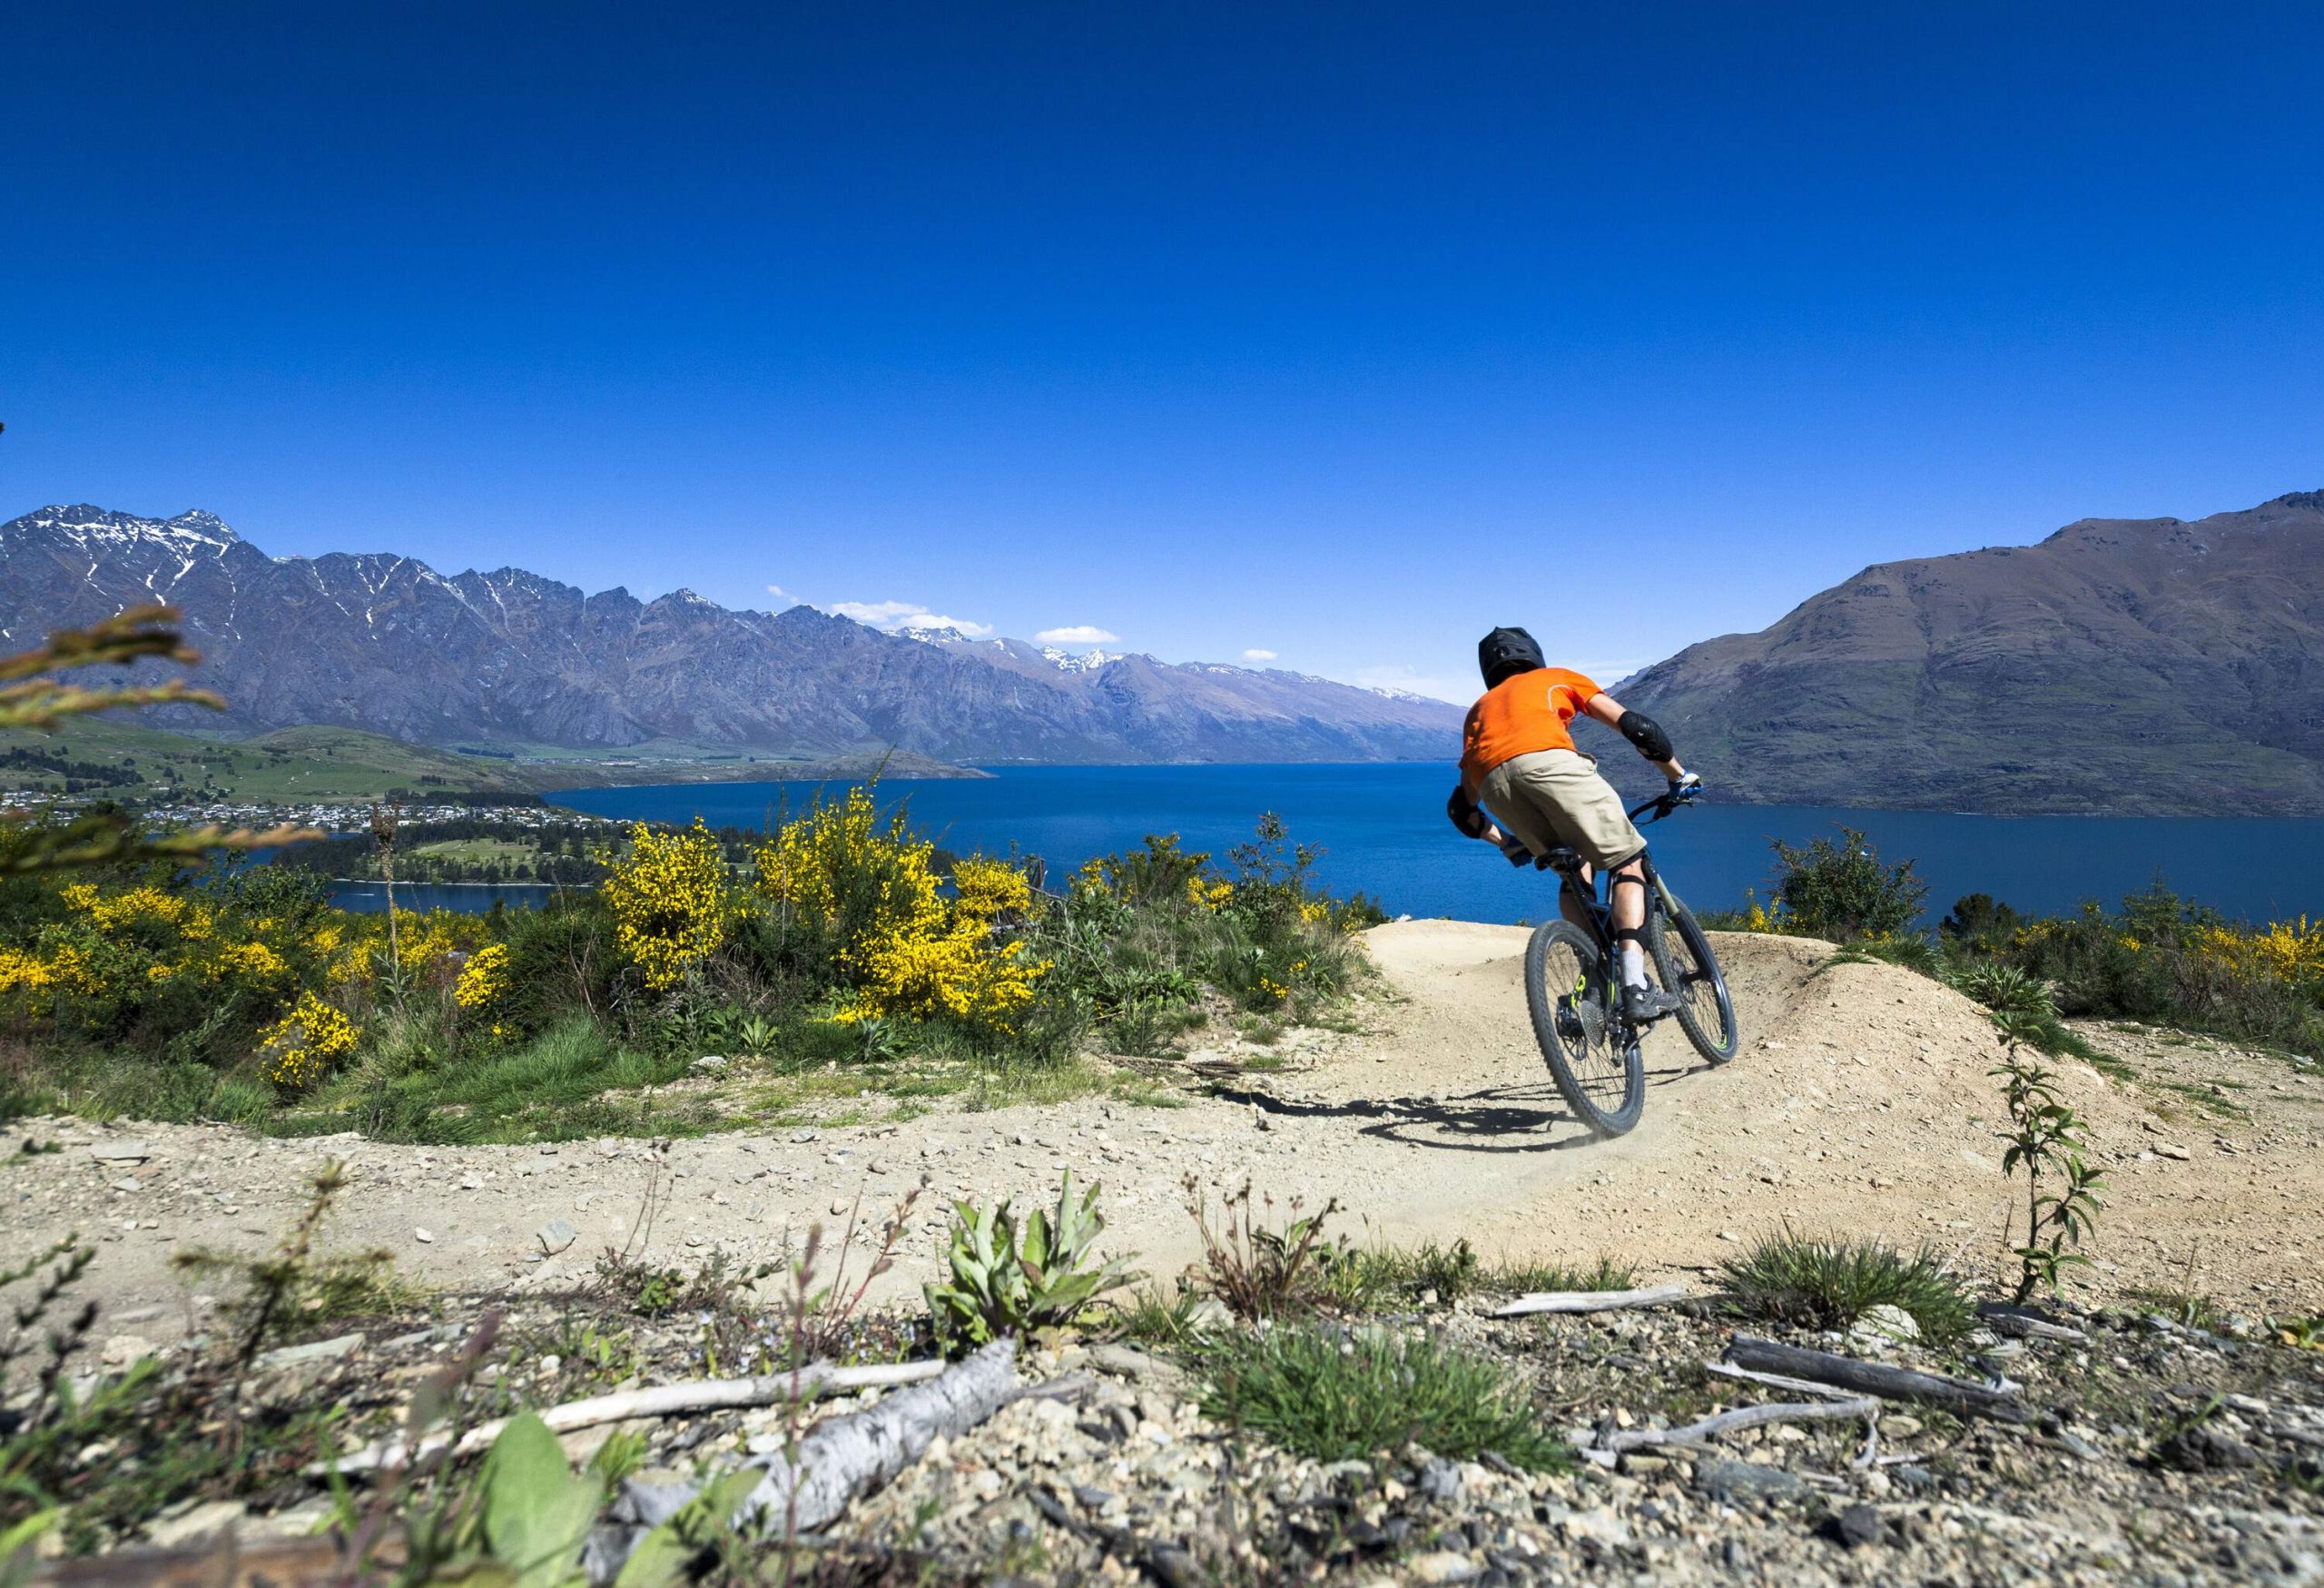 A rear view of a man riding a bike on a rugged mountain overlooking a lovely blue lake.